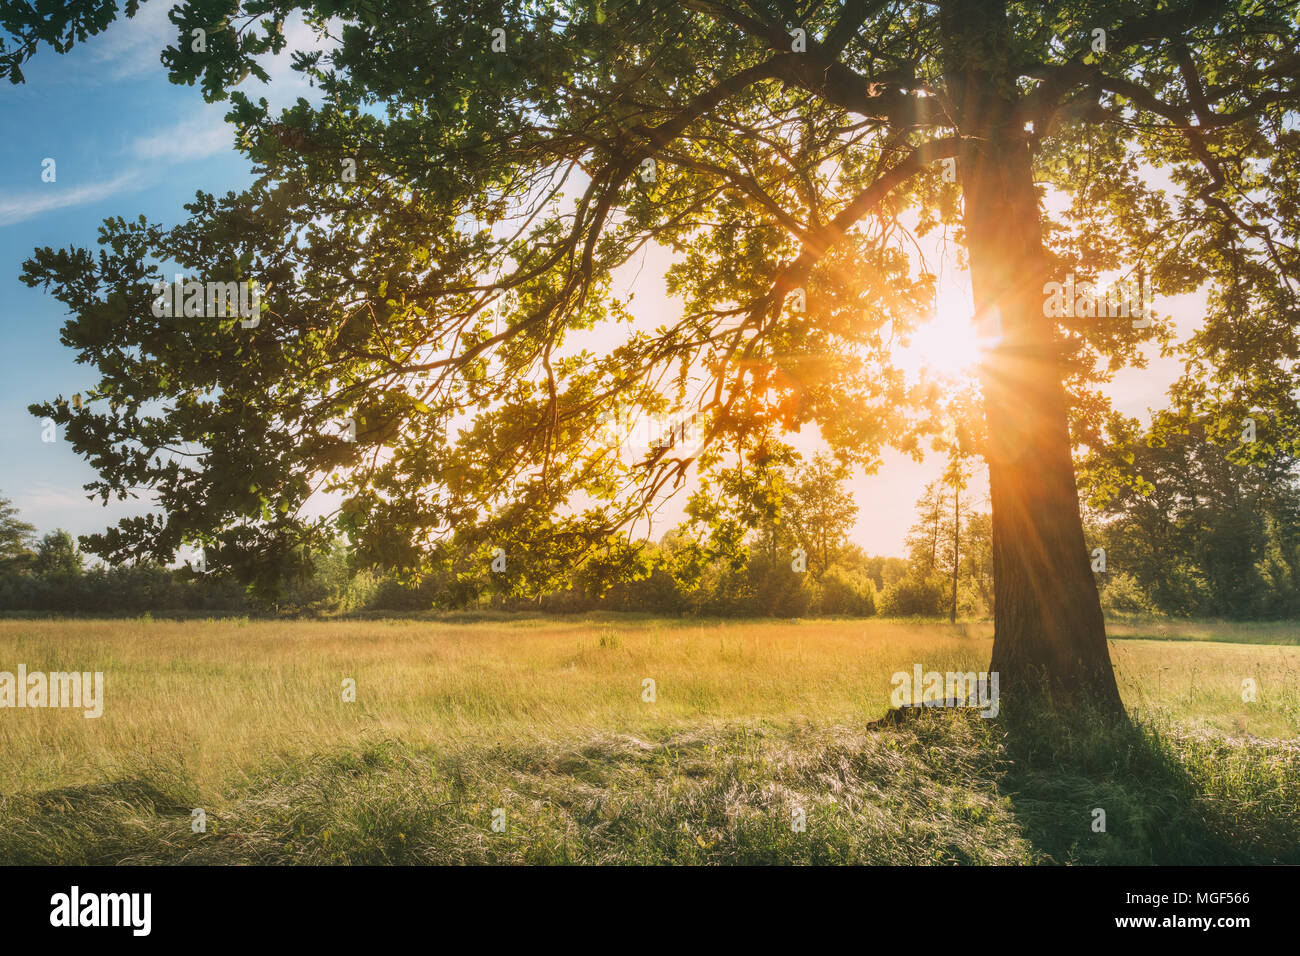 Sun Shining Through Greenery Oak Foliage In Green Park. Summer Sunny Forest Trees And Green Grass. Nature Wood Sunlight Background. Stock Photo